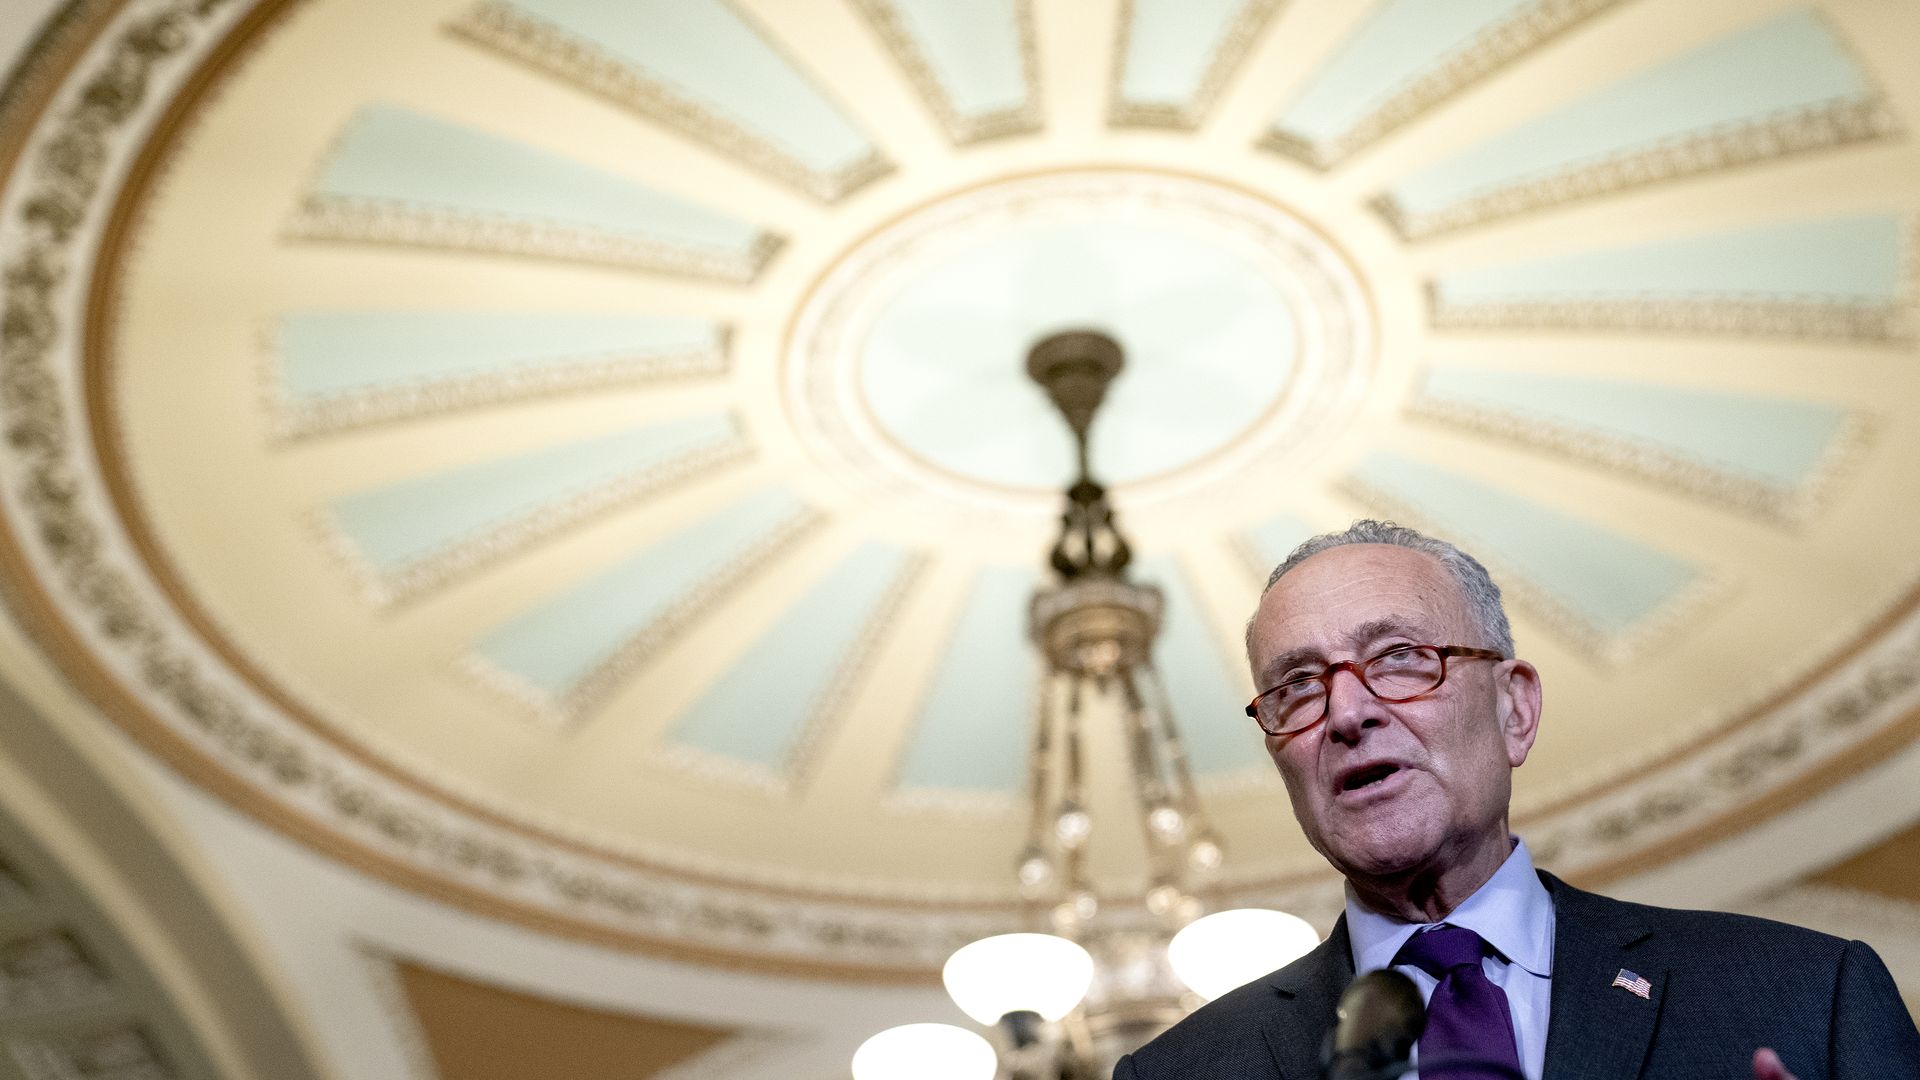 Senate Majority Leader Chuck Schumer is seen speaking at the Capitol on Tuesday.